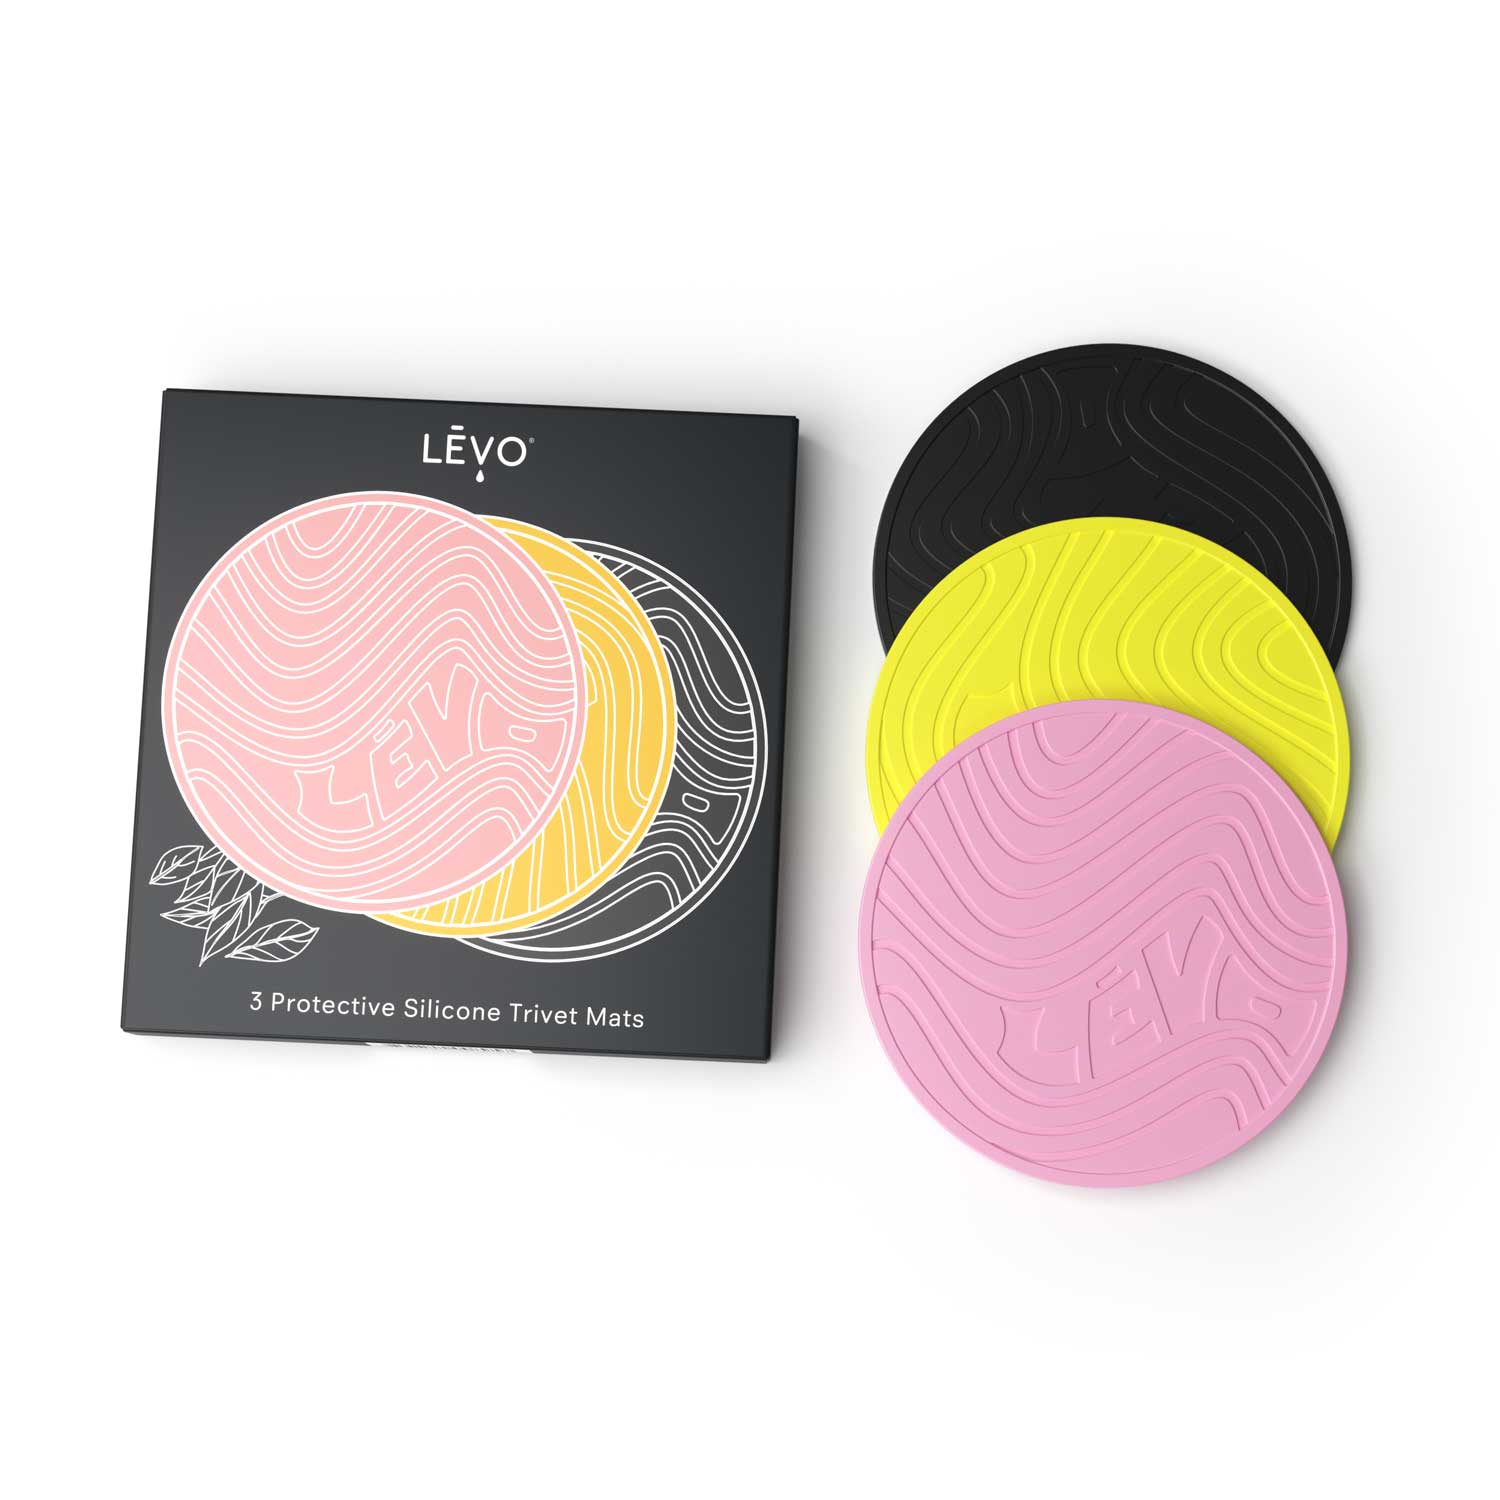 LEVO Silicone Trivets in yellow, pink, and black with packaging